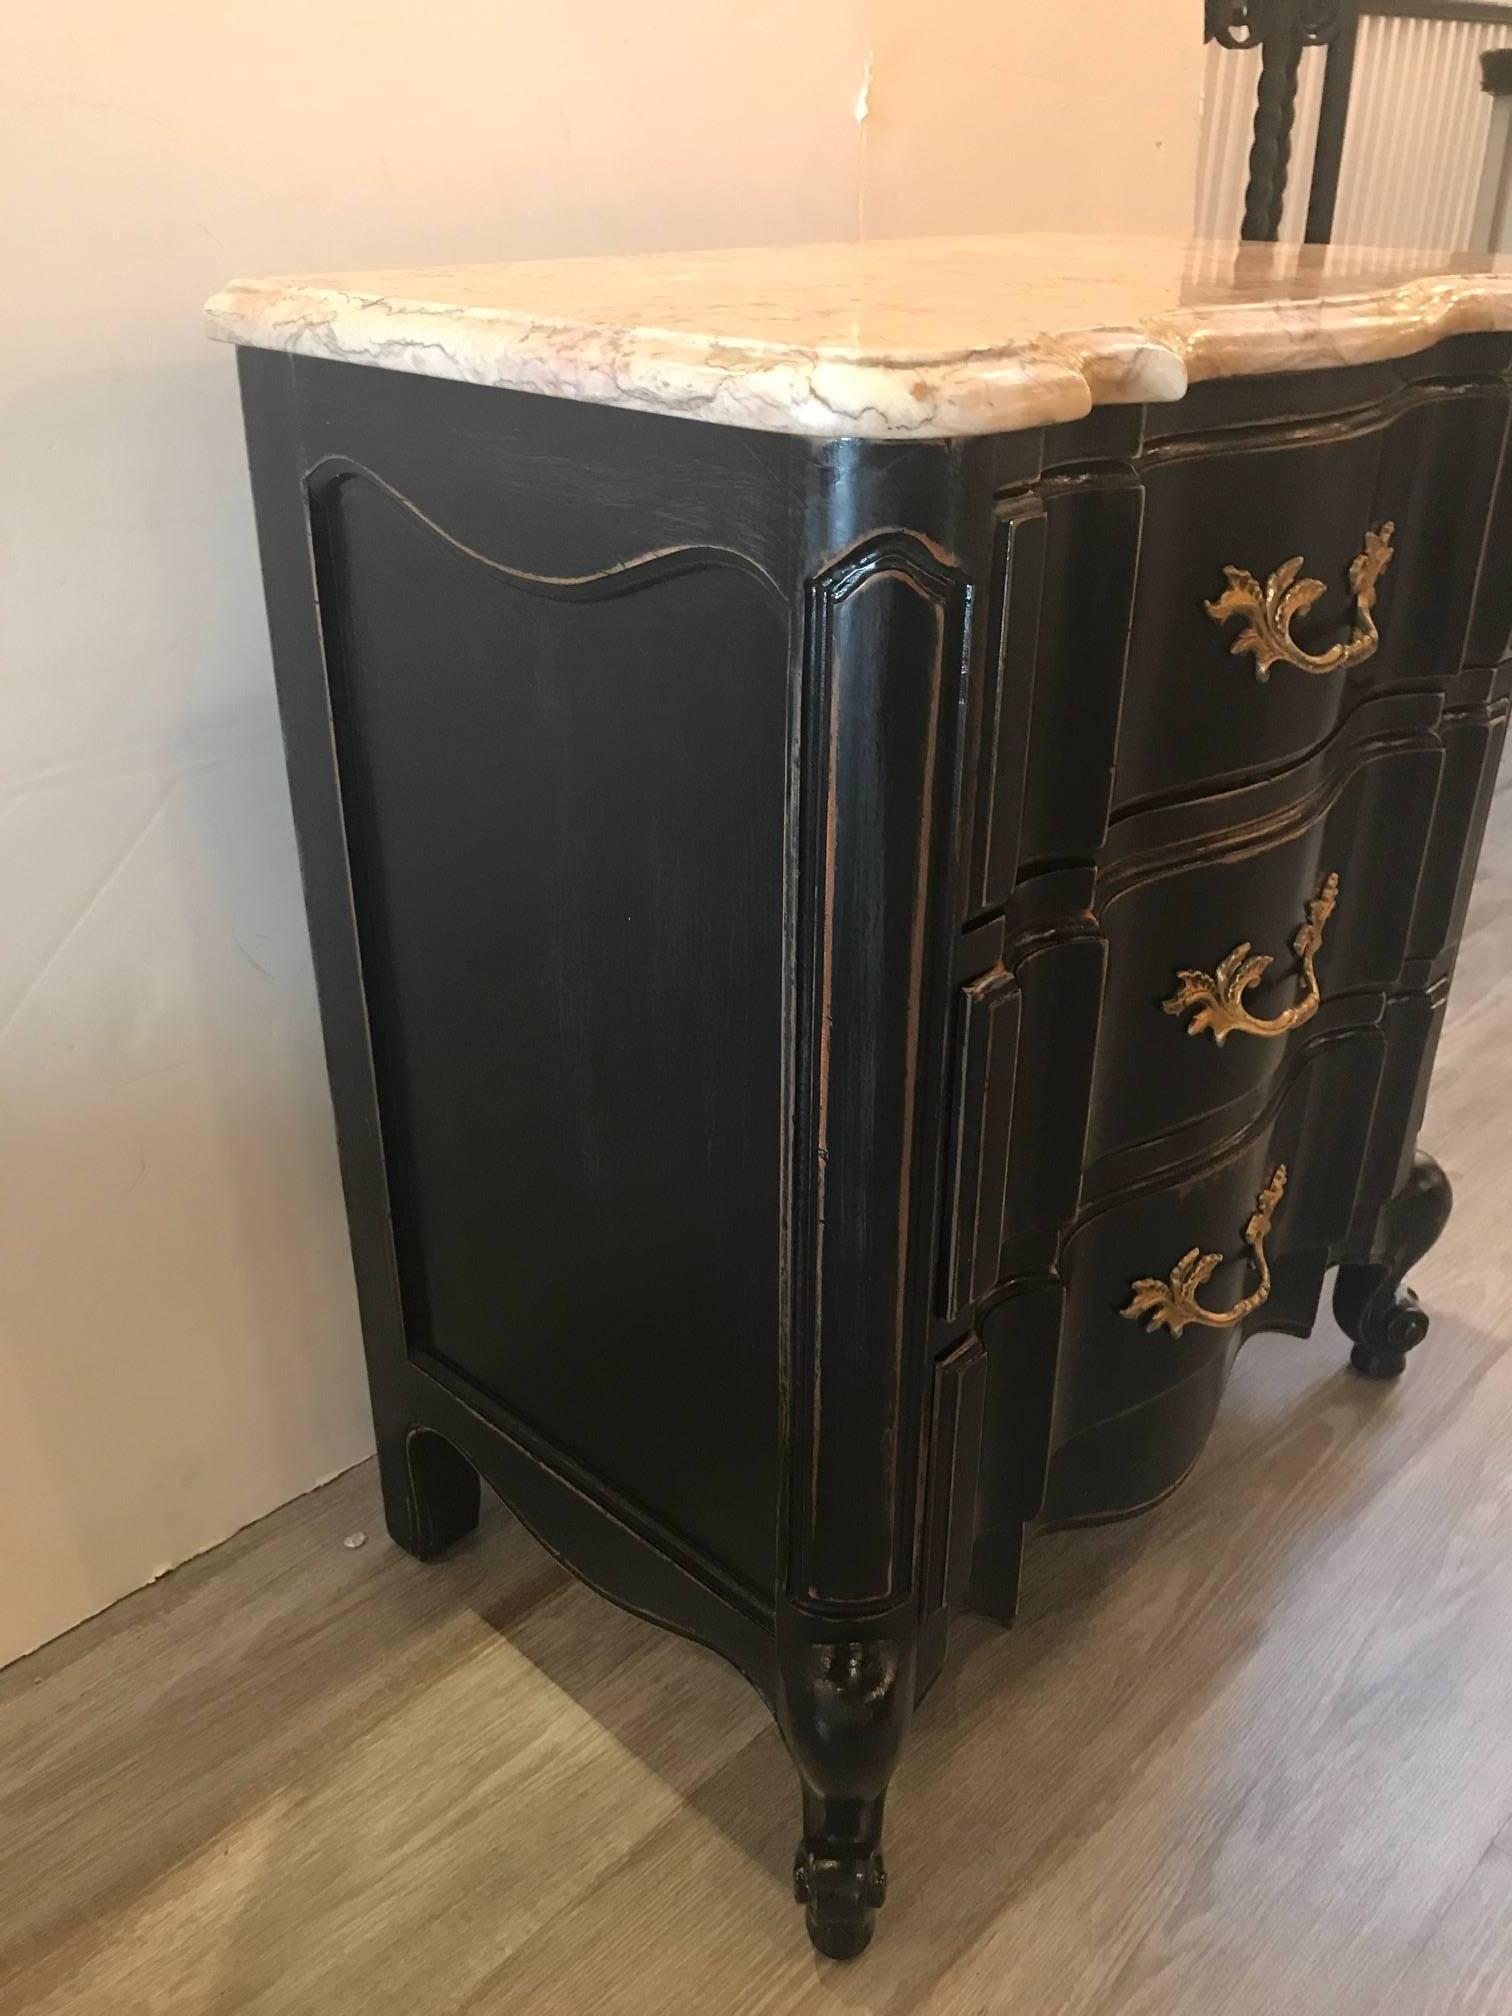 Shapely pair of French Provincial style drawer stands with original marble tops. The distressed black finish with cast brass handles featuring three drawers on each. One marble top has a professional repaired crack done well and blends beautifully.